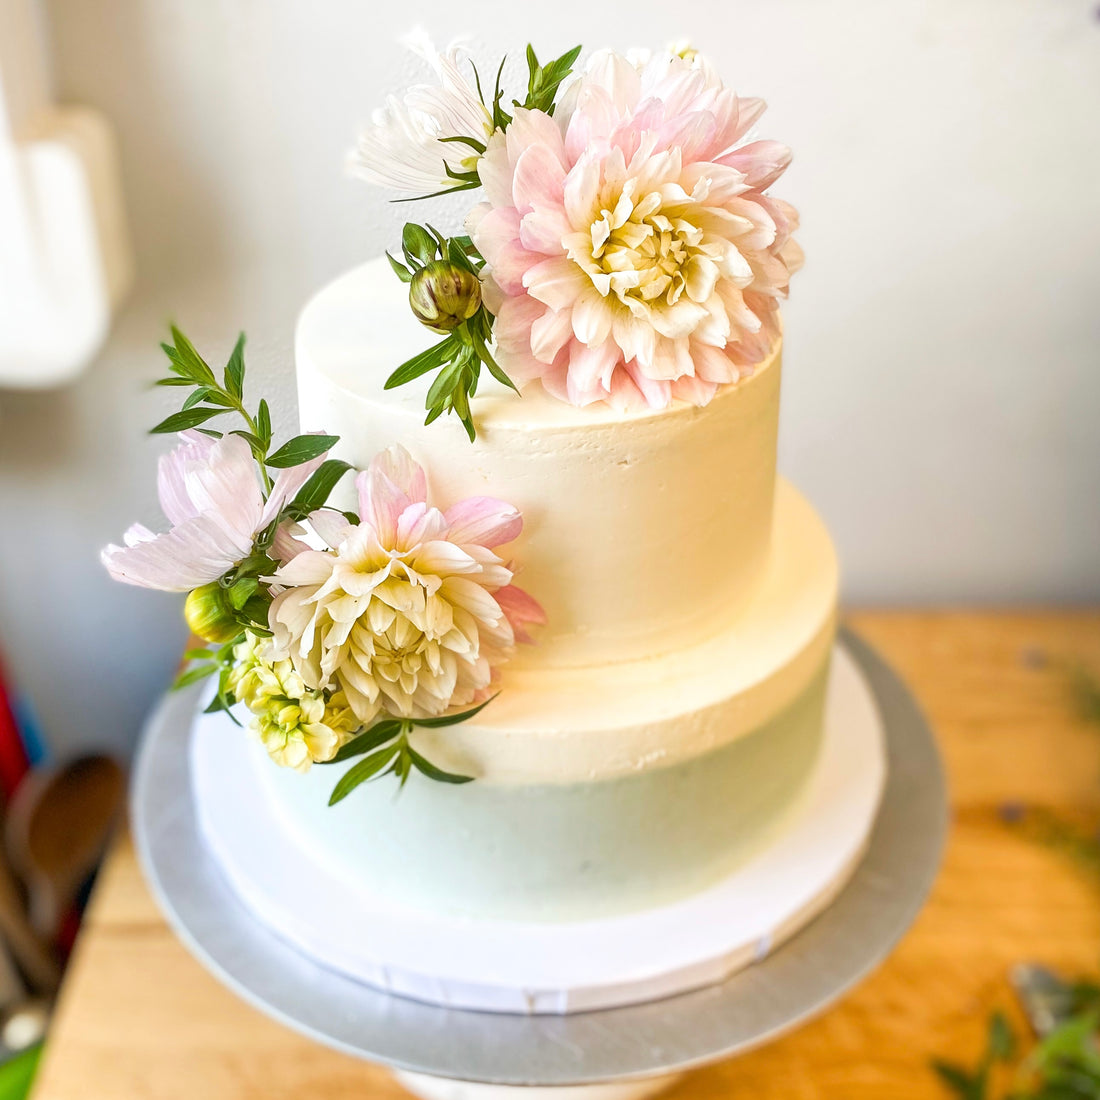 A two-tier cake decorated with two diagonal floral bouquets. The bottom half of the bottom tier is frosted with a defuse band of blue buttercream; the rest of the cake is white.